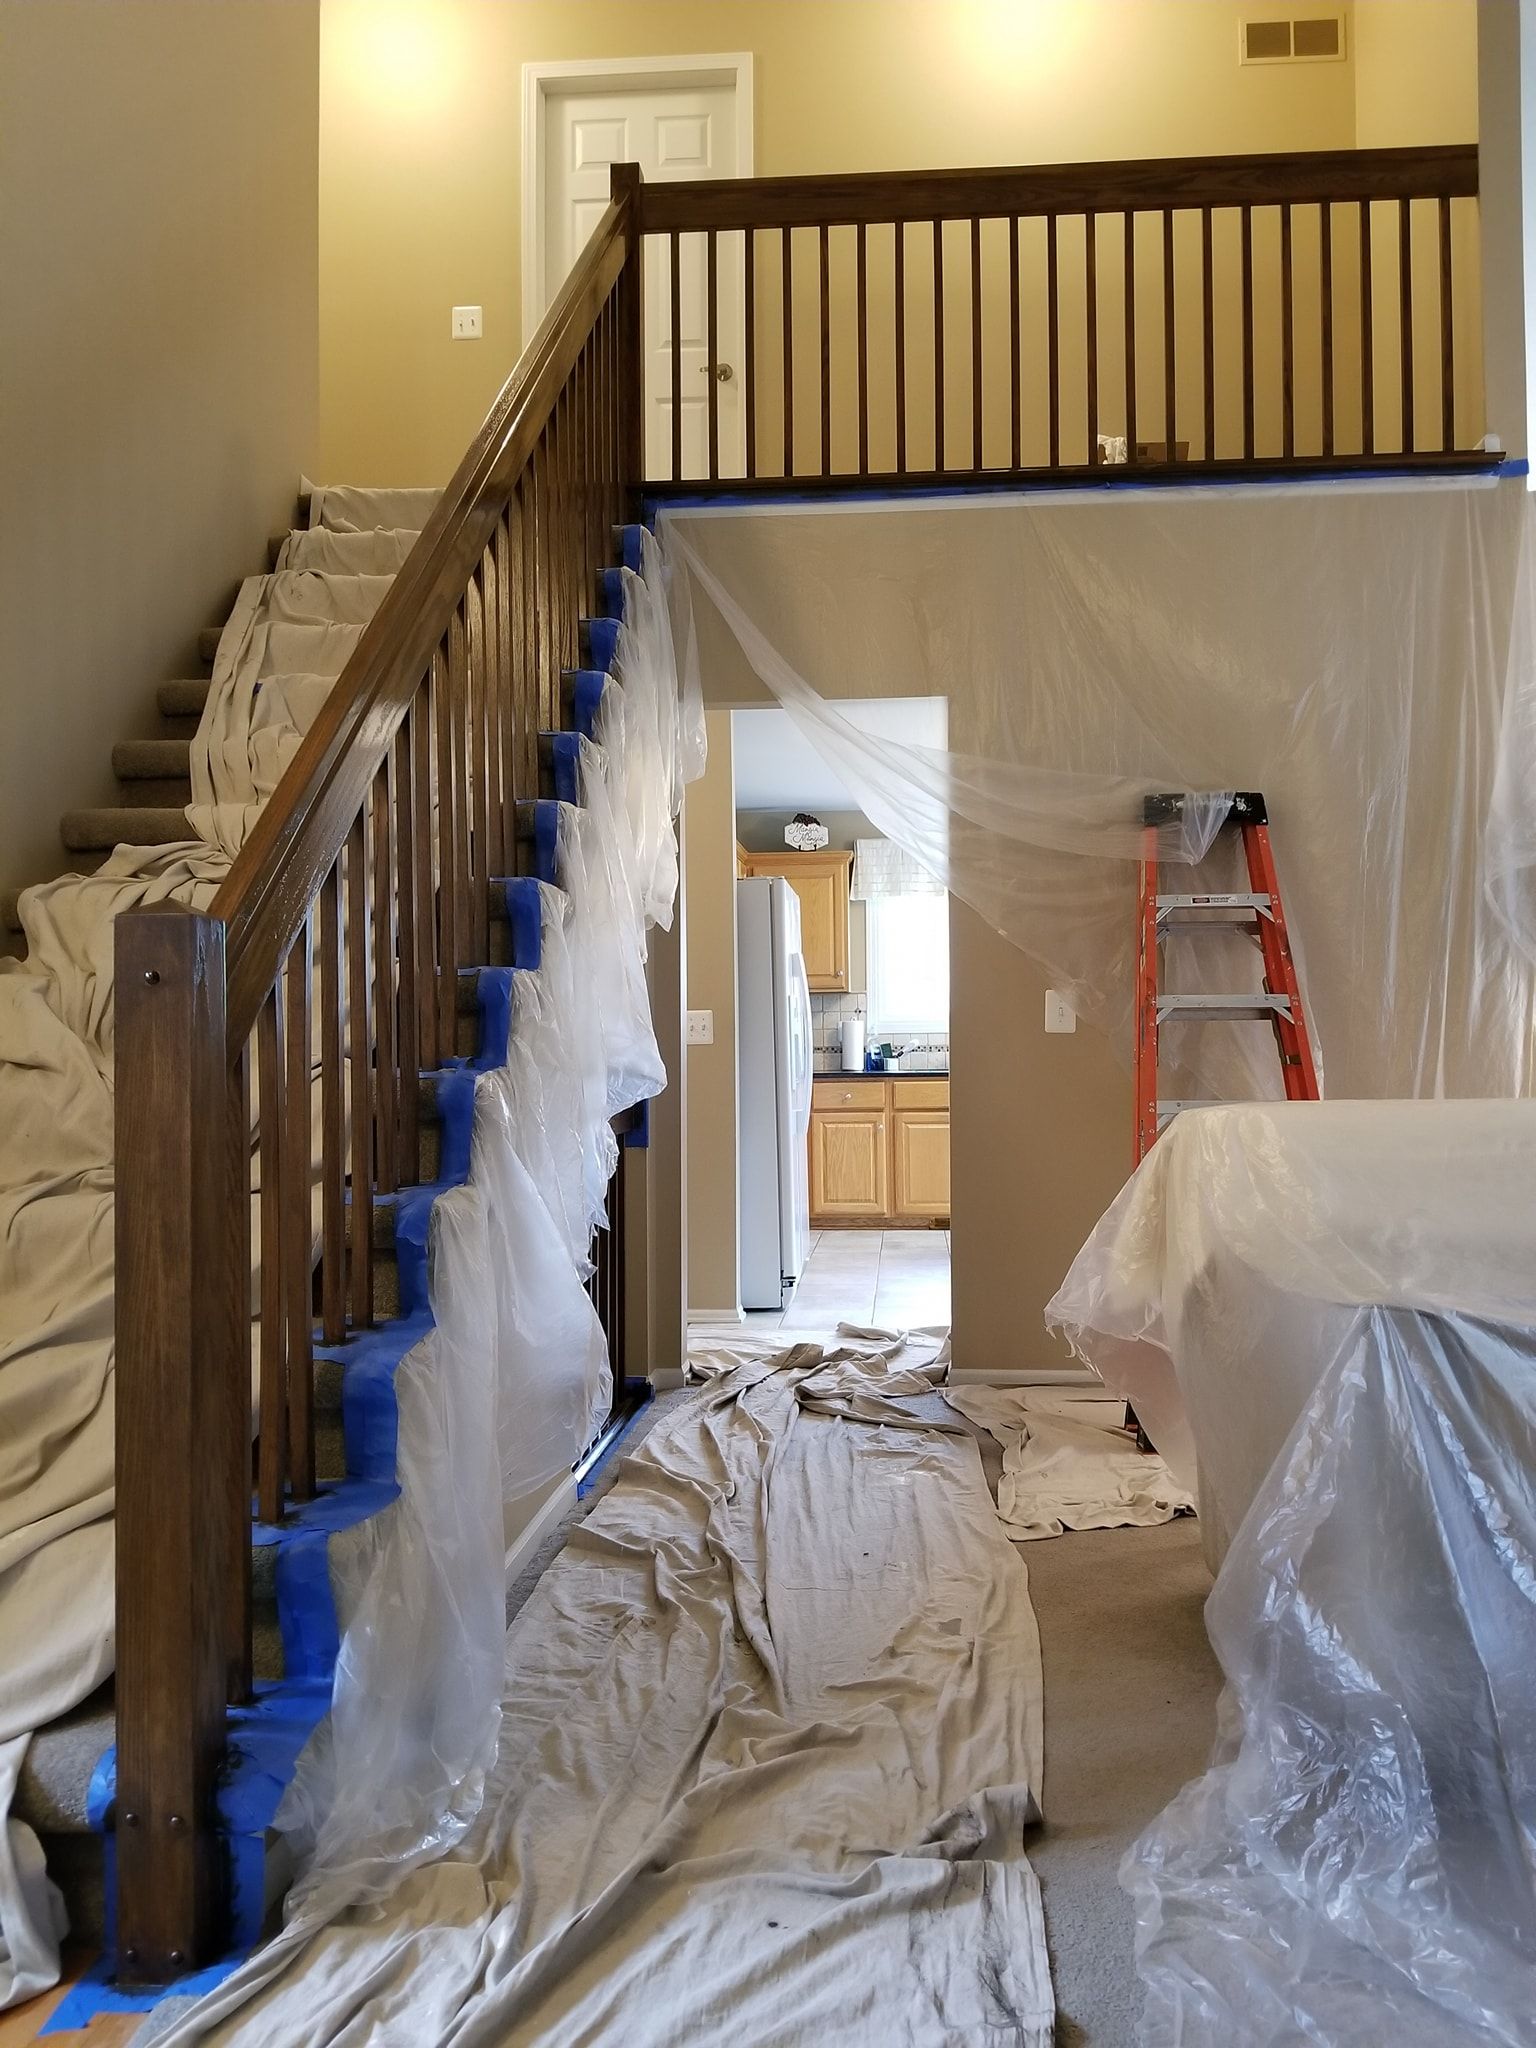 A staircase in a house that is being painted